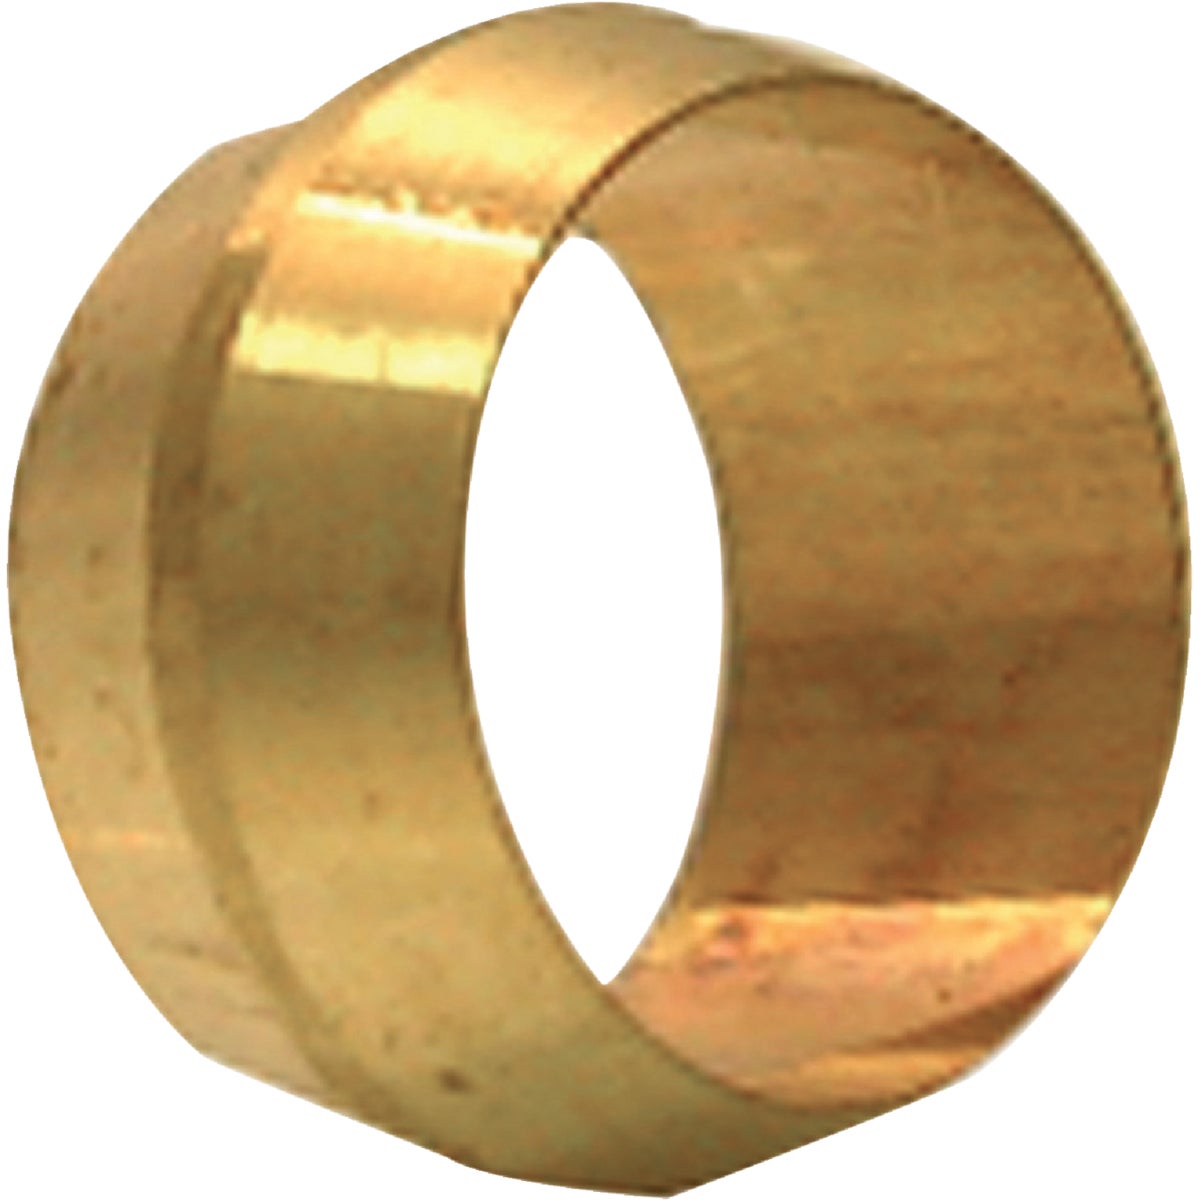 Lasco 3/16 In. Brass Compression Sleeve (2-Pack)